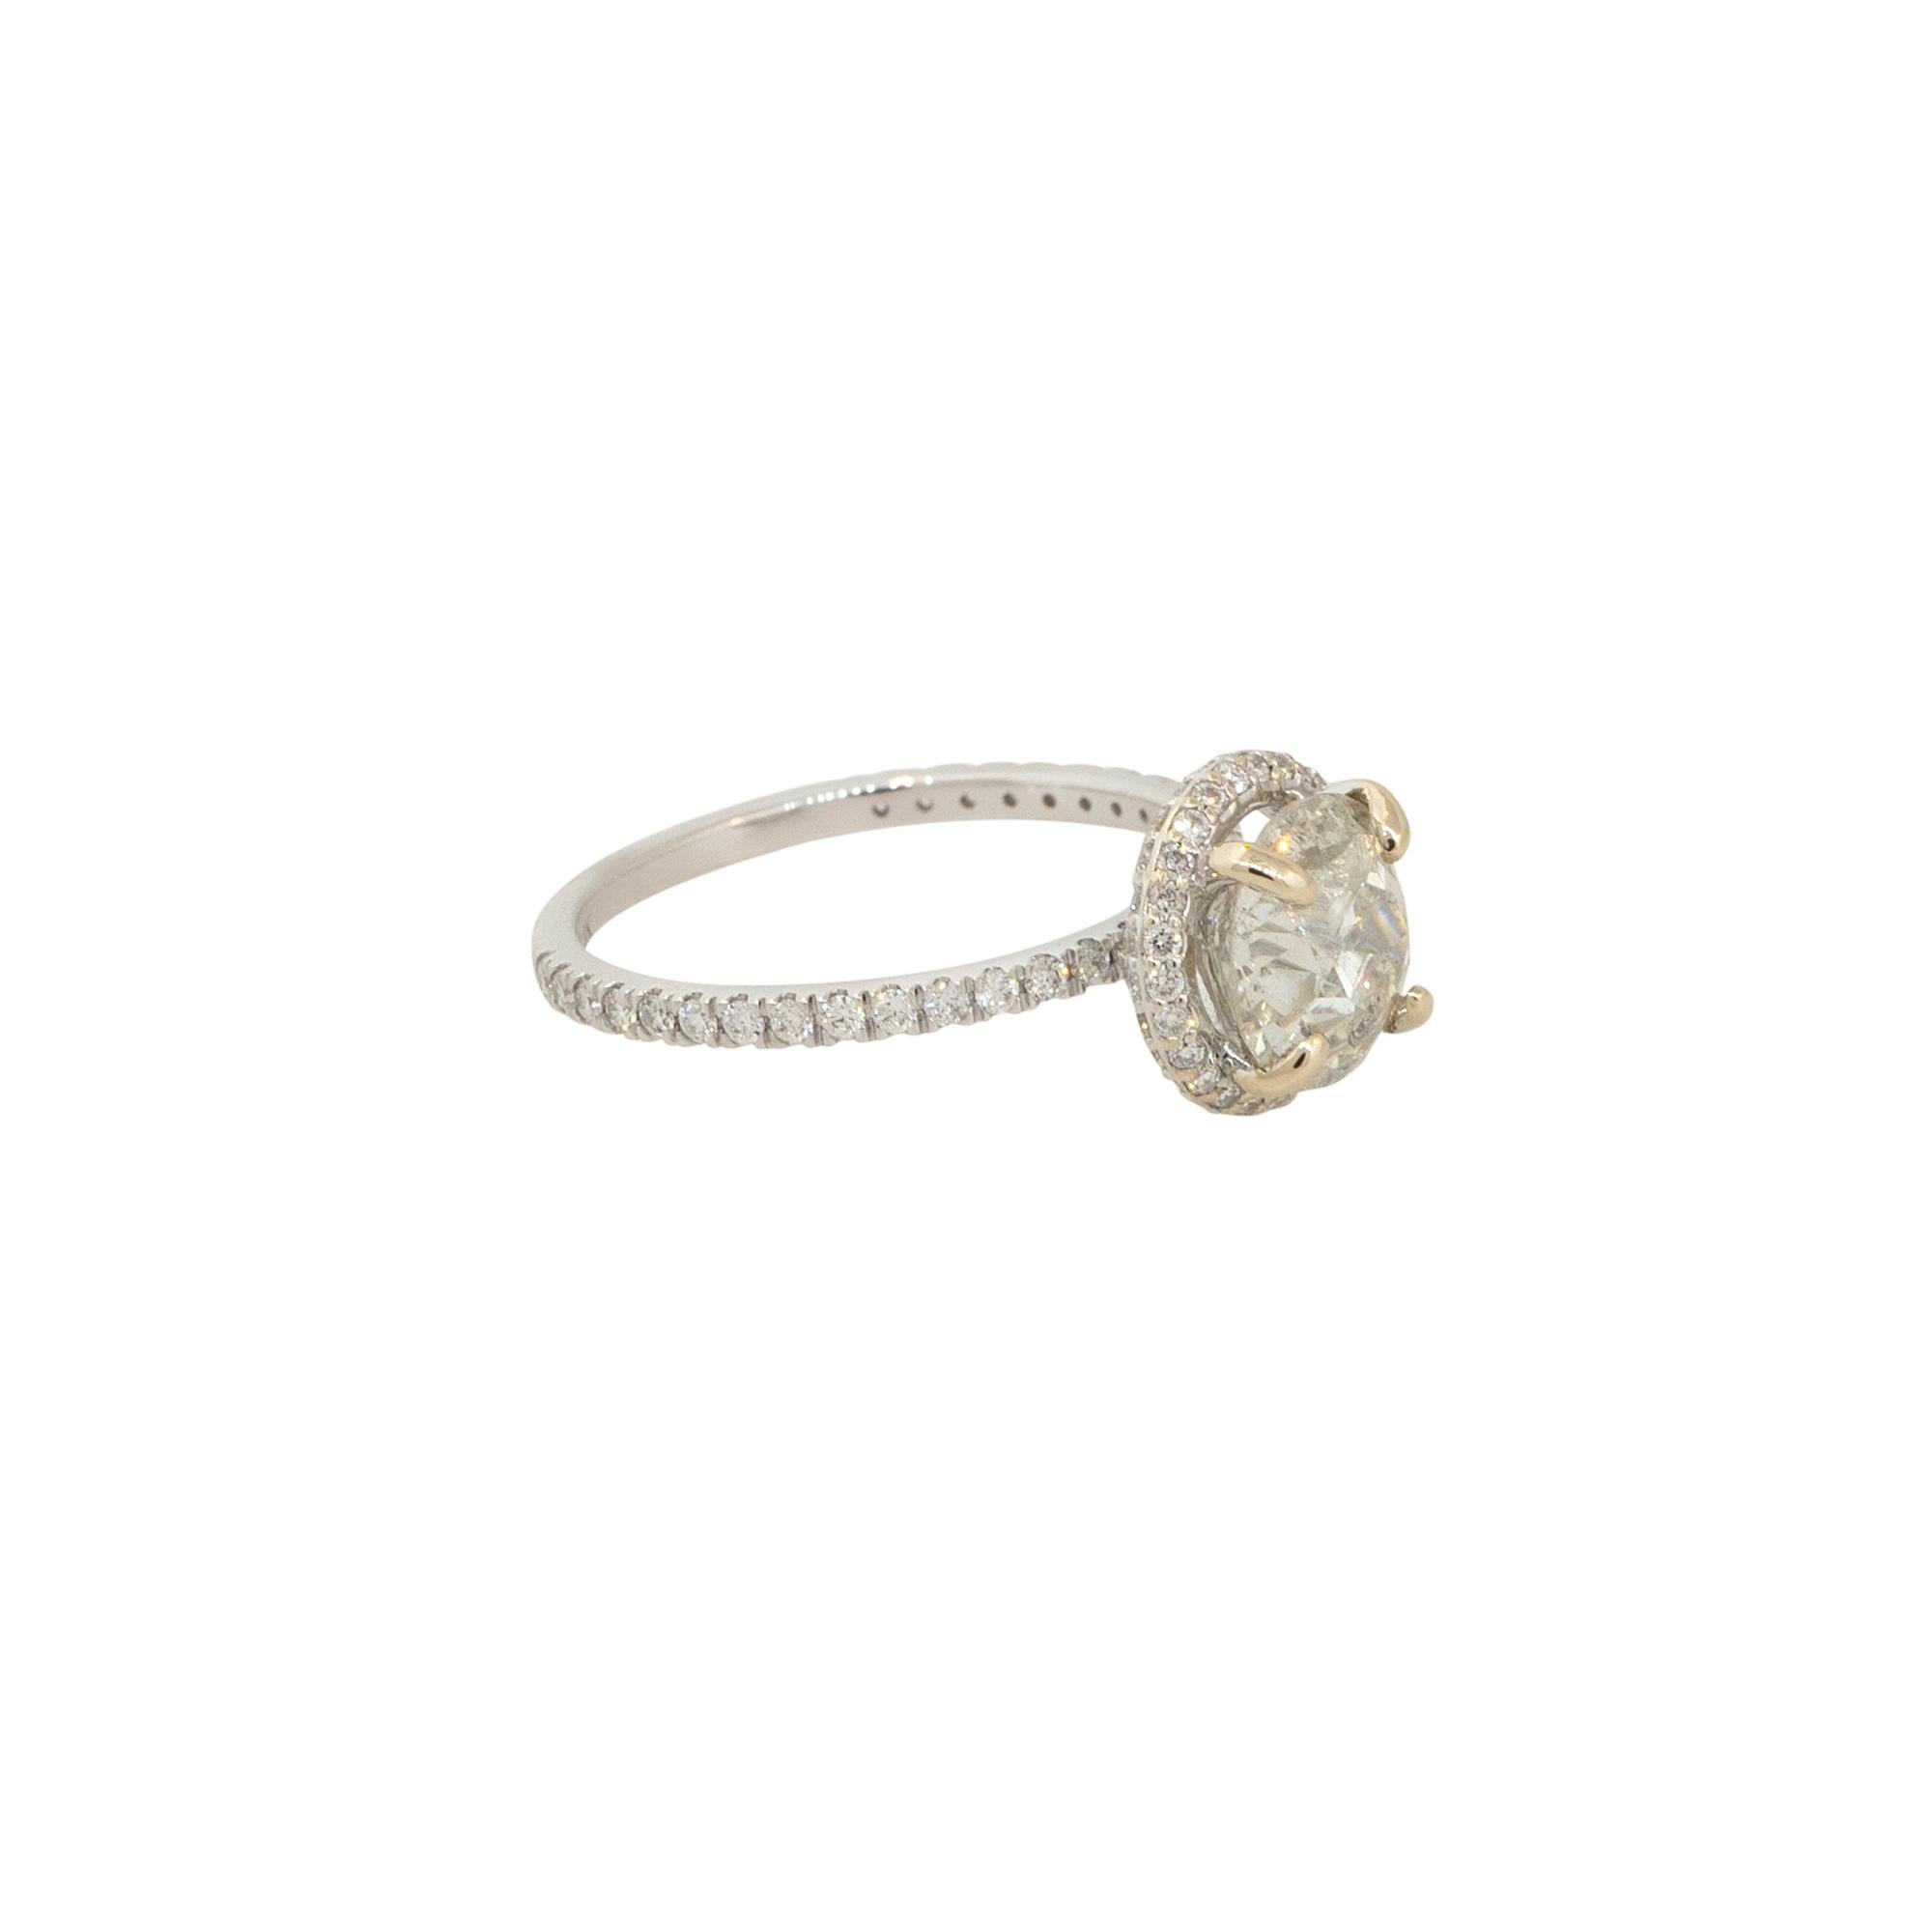 18k White Gold 2.52ctw Old Euro Cut Diamond Halo Engagement Ring

Raymond Lee Jewelers in Boca Raton -- South Florida’s destination for diamonds, fine jewelry, antique jewelry, estate pieces, and vintage jewels.

Style: Women's 4 Prong Engagement